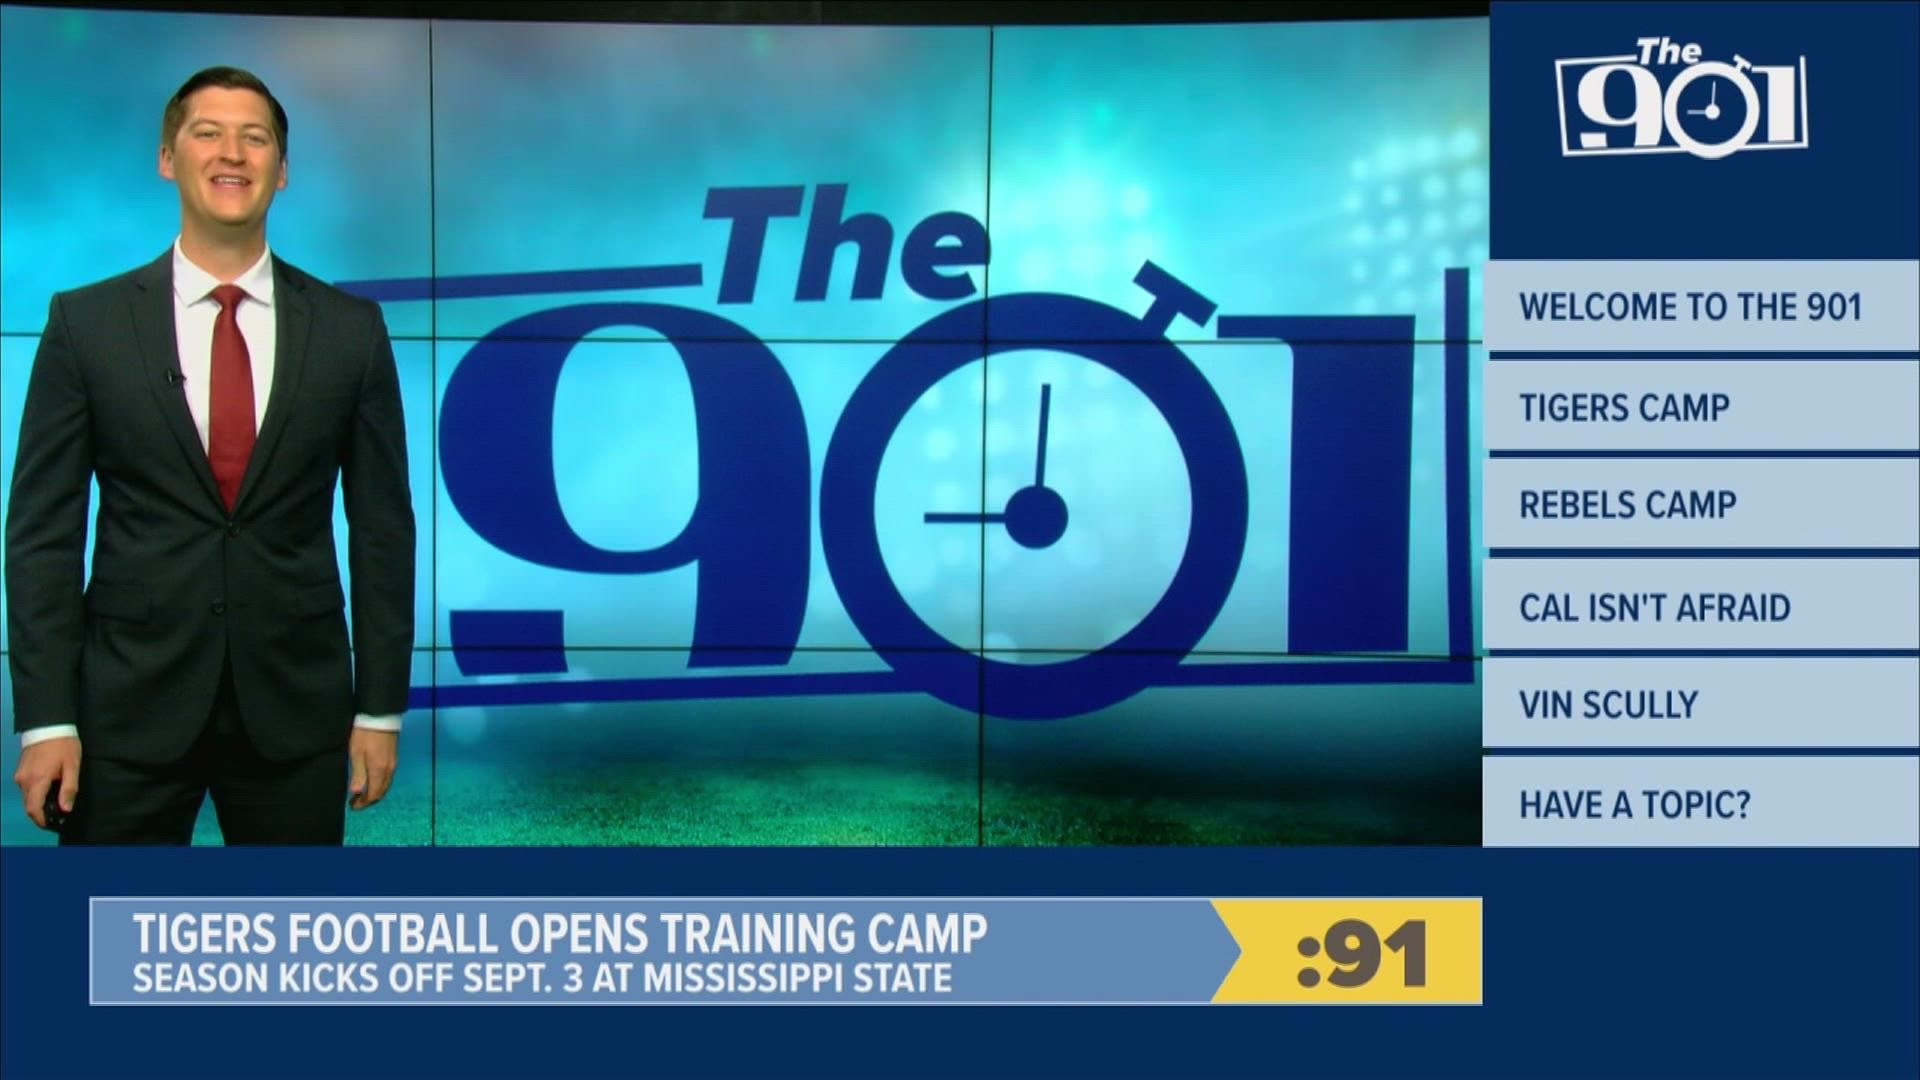 Clayton Collier gets you up to speed on everything Memphis sports in Wednesday's episode of The 901.